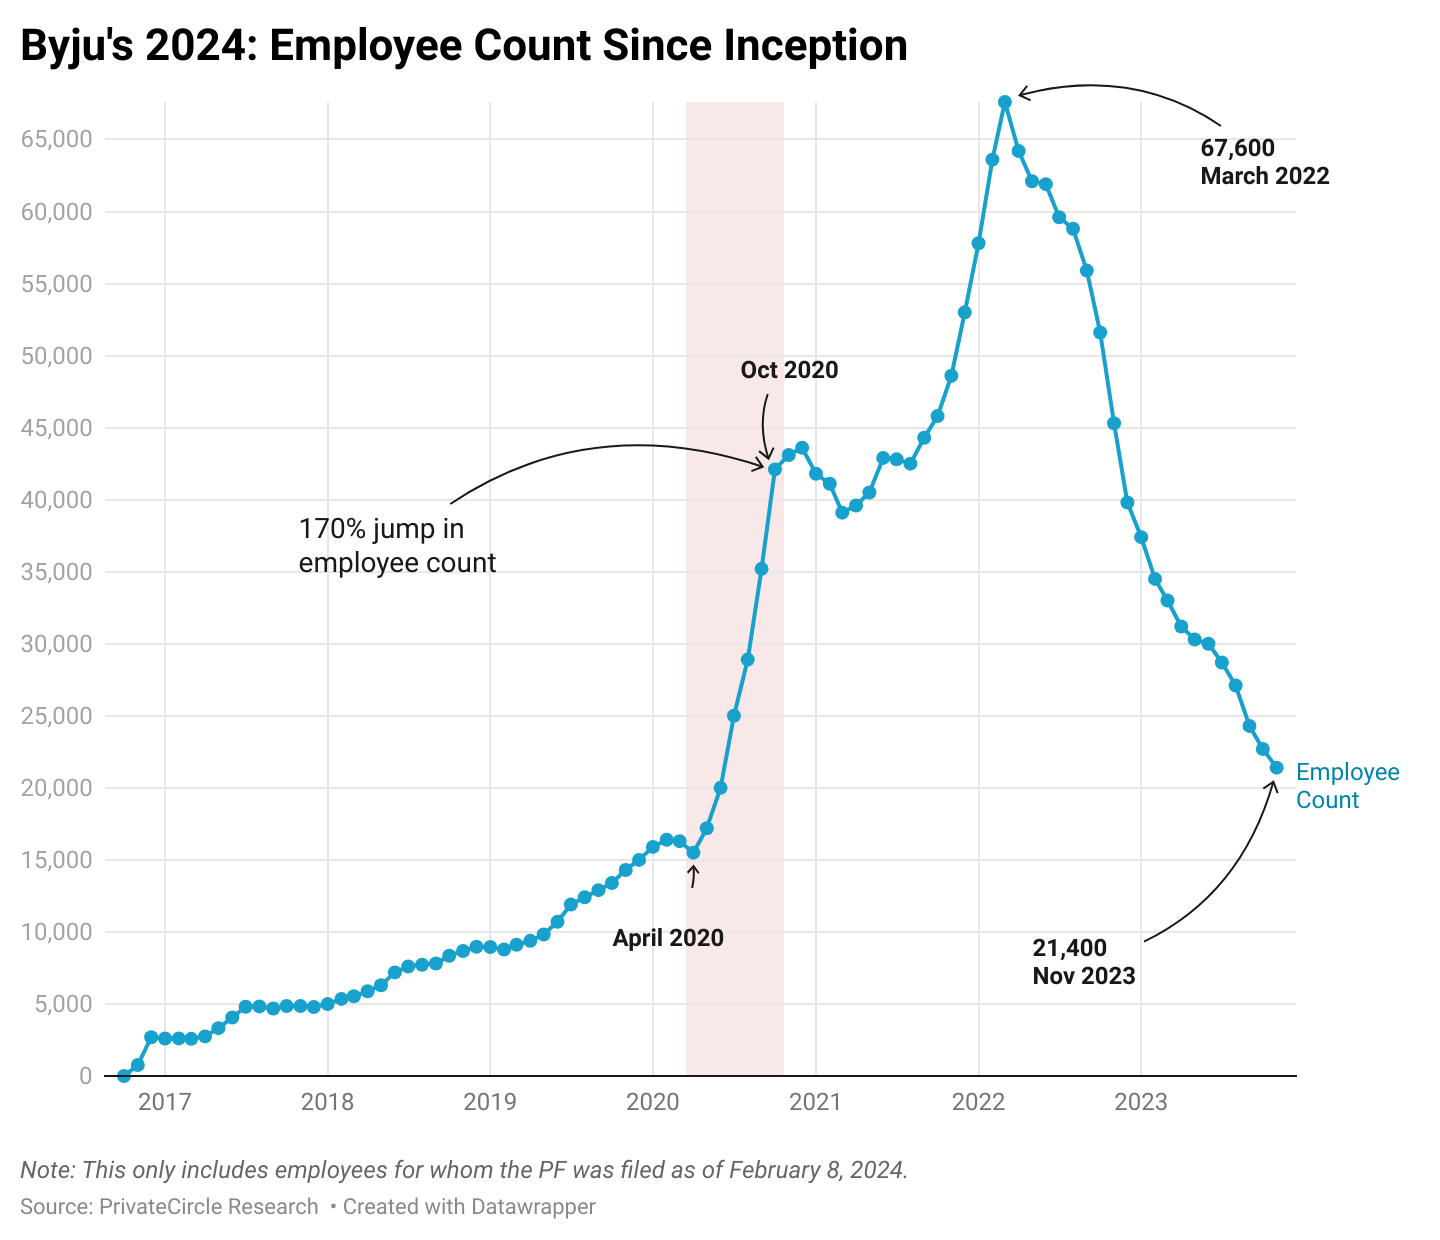 Byju's 2024: Employee Count Since Inception.

Byju's employee count hit its peak at 67,000 people in March 2022. The company accelerated its hiring activity after the Covid19 outbreak in 2020 resulting in a 170% jump in its workforce between April 2020 and Oct 2020.